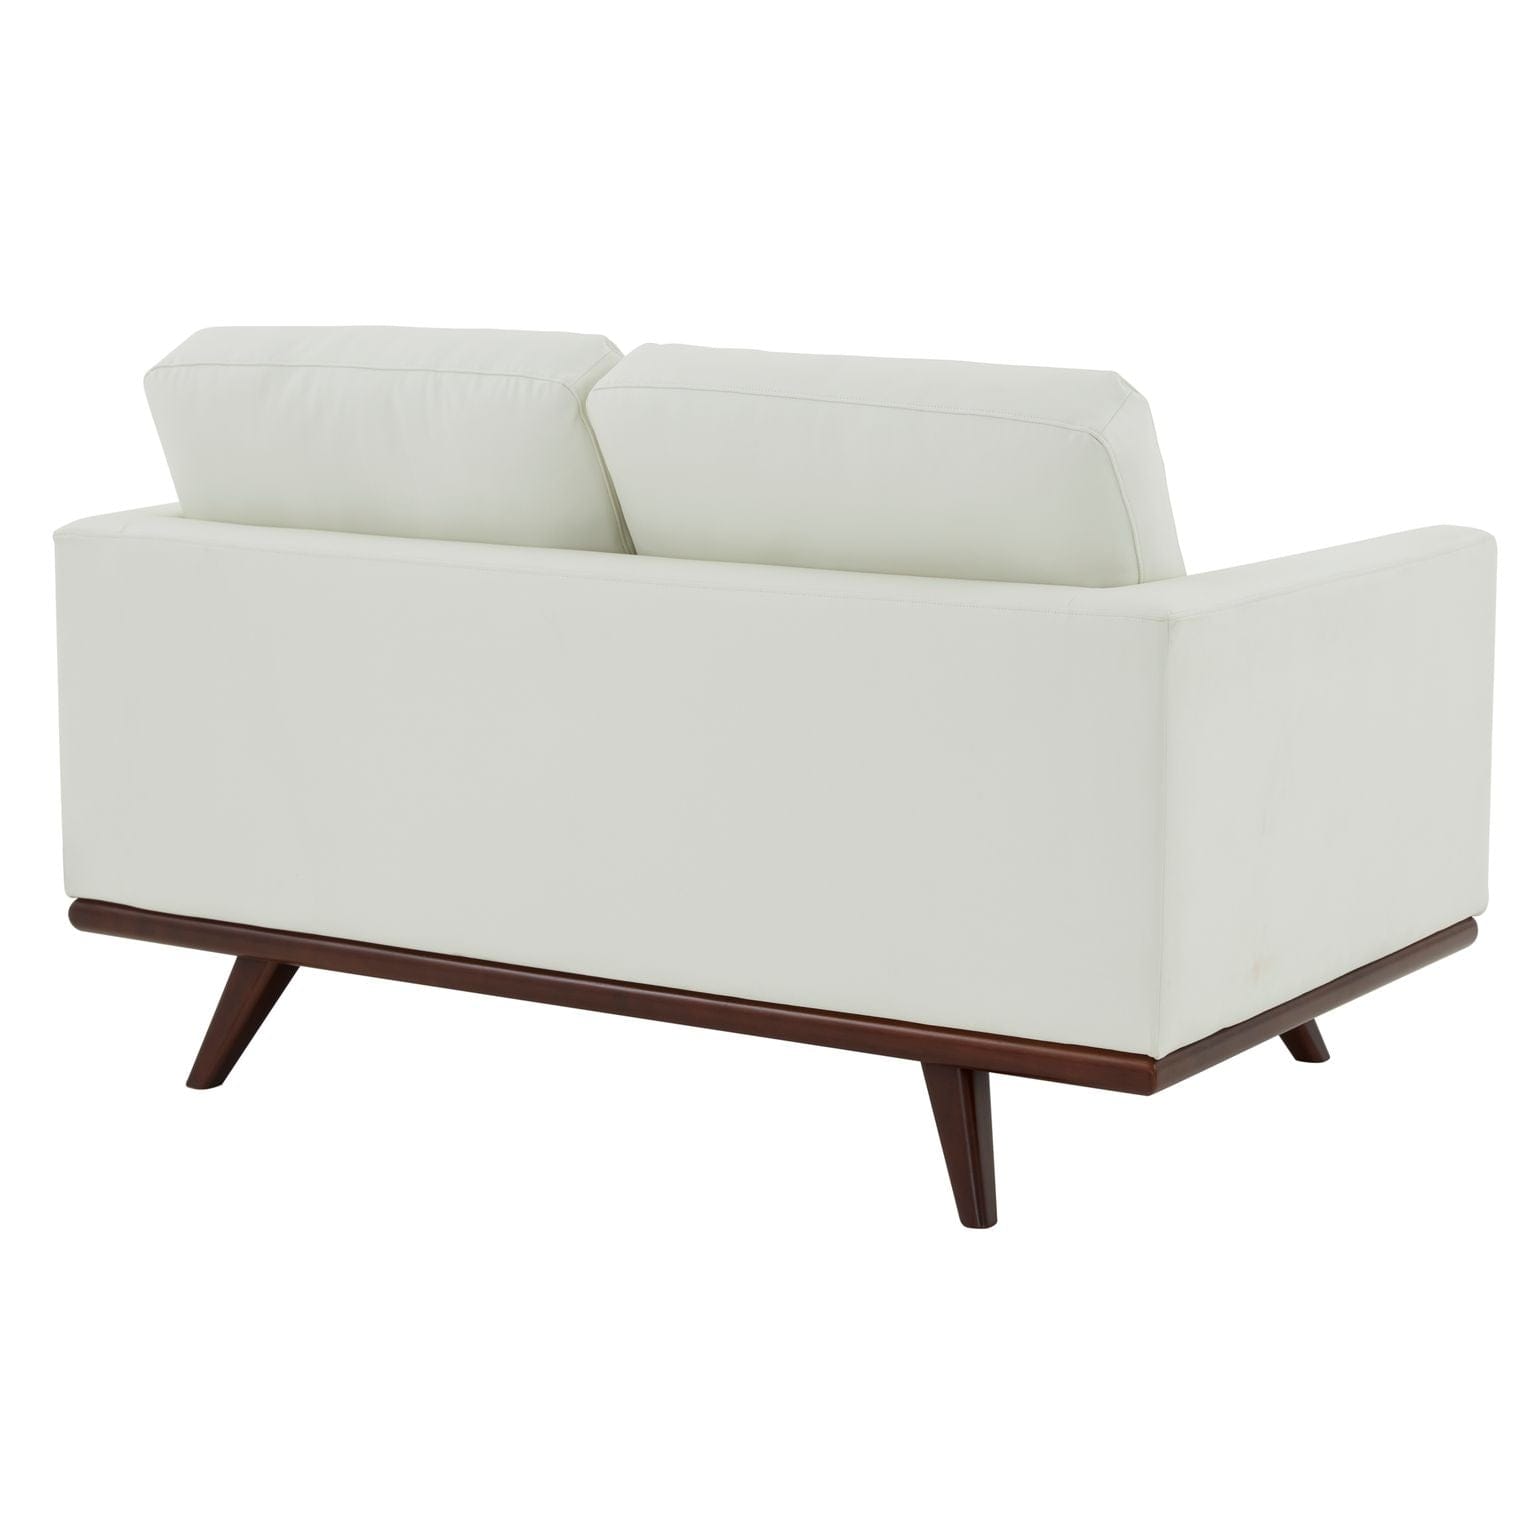 LeisureMod Chester Leather Loveseat - White